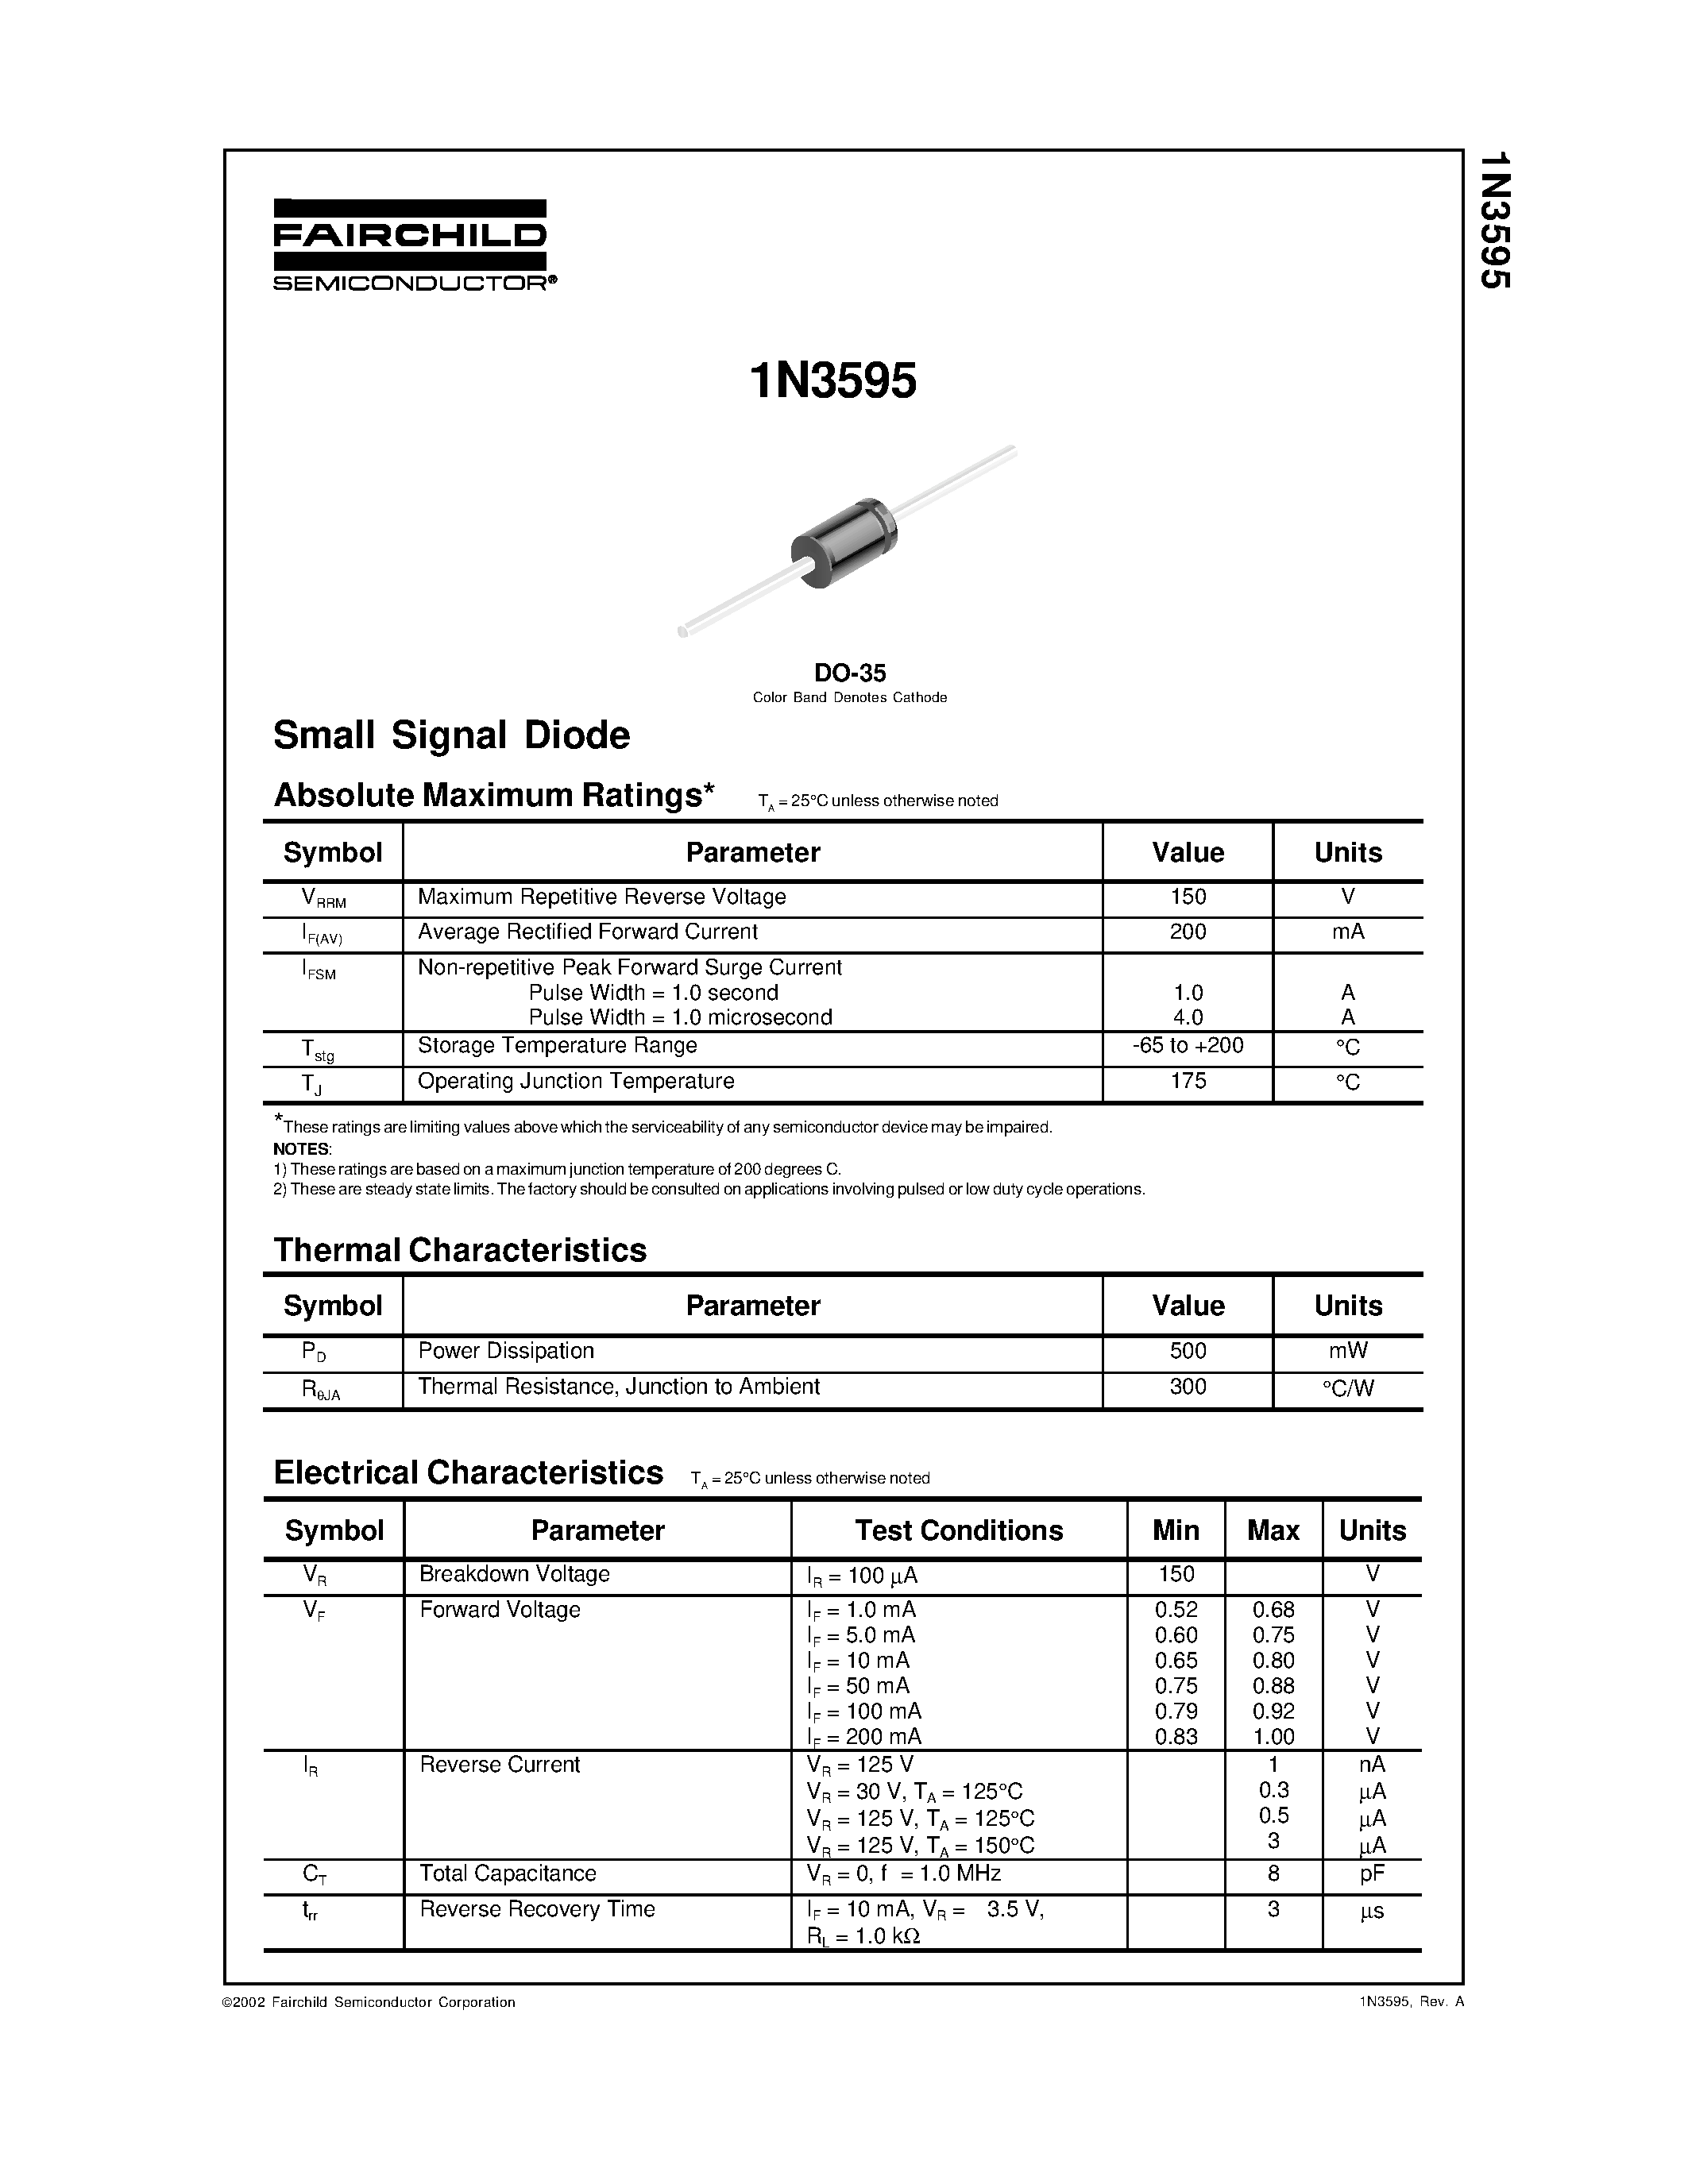 Datasheet 1N3595 - Small Signal Diode Absolute Maximum Ratings page 1